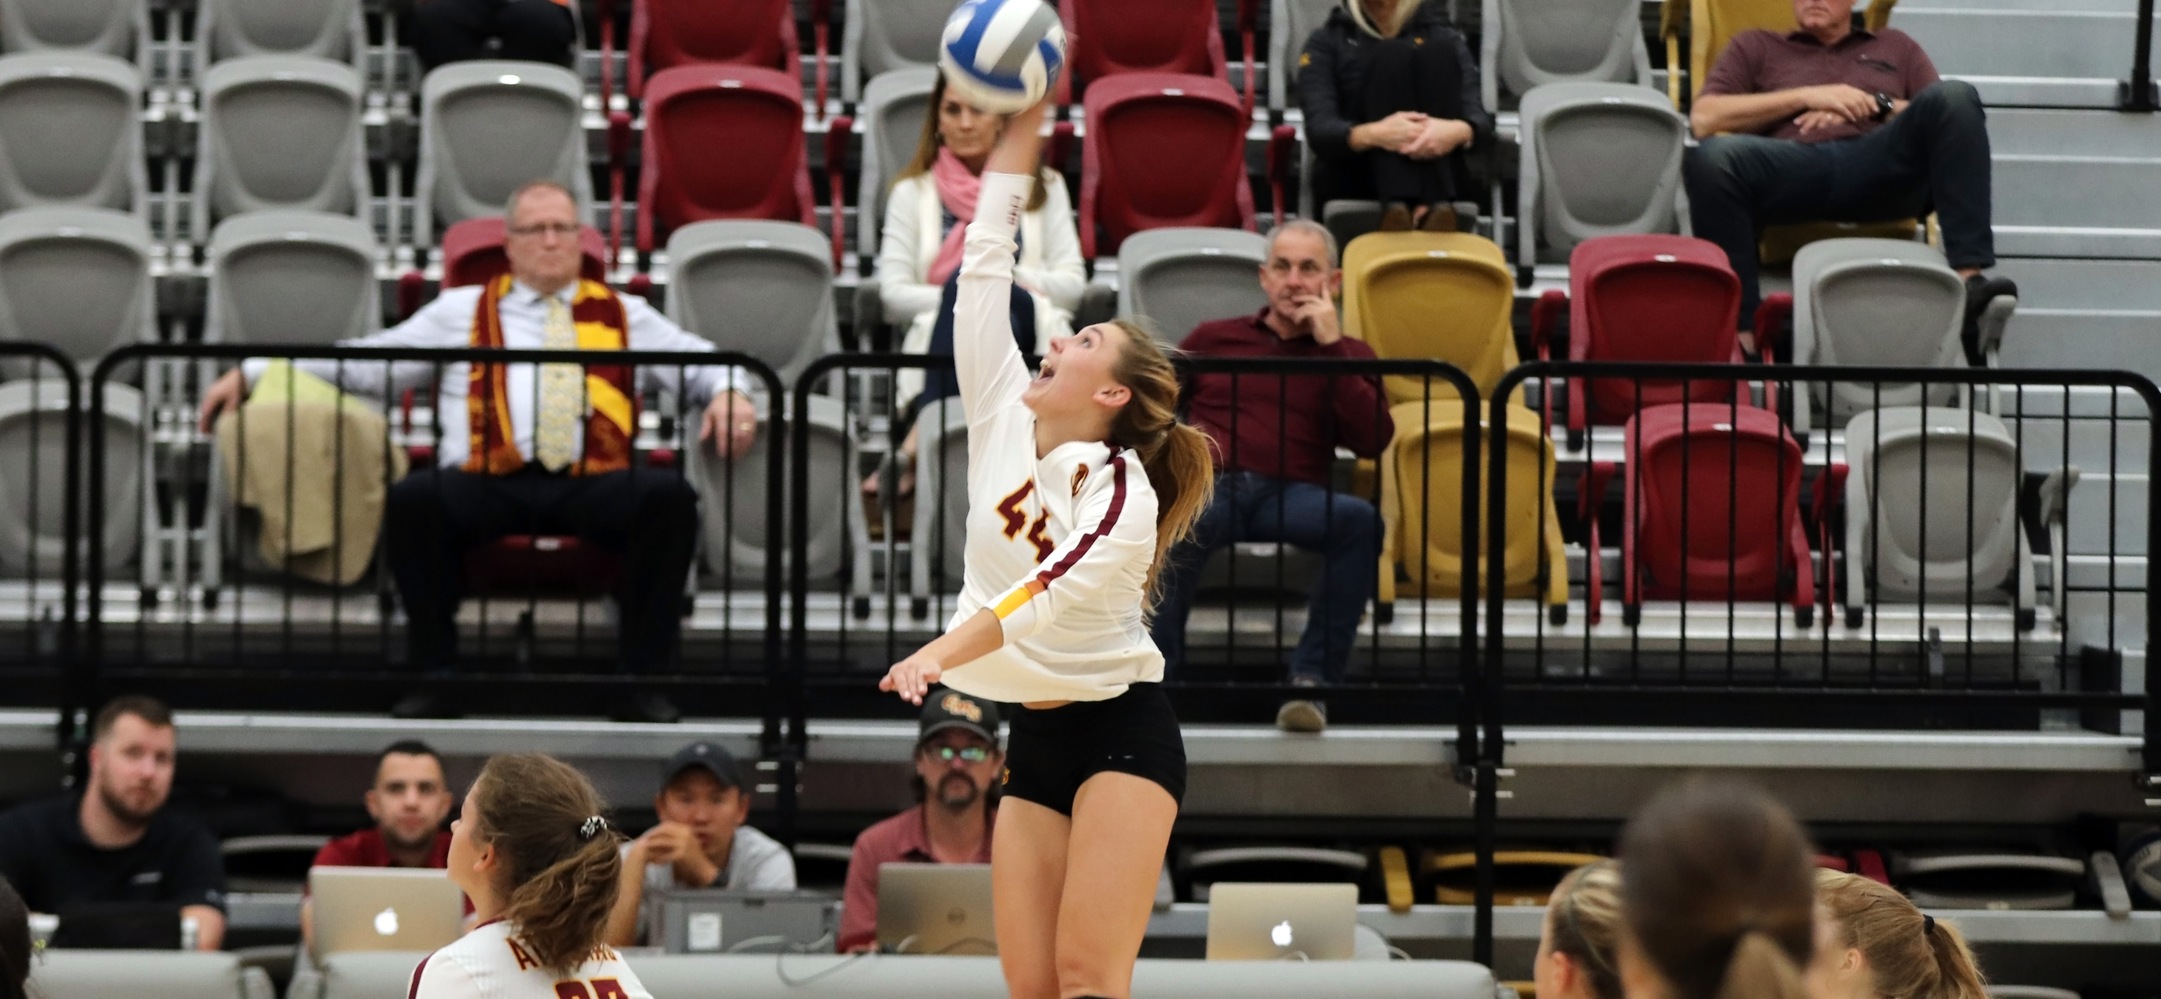 Phoebe Madsen had 18 kills without an error in two matches this week (photo by Daniel Addison)